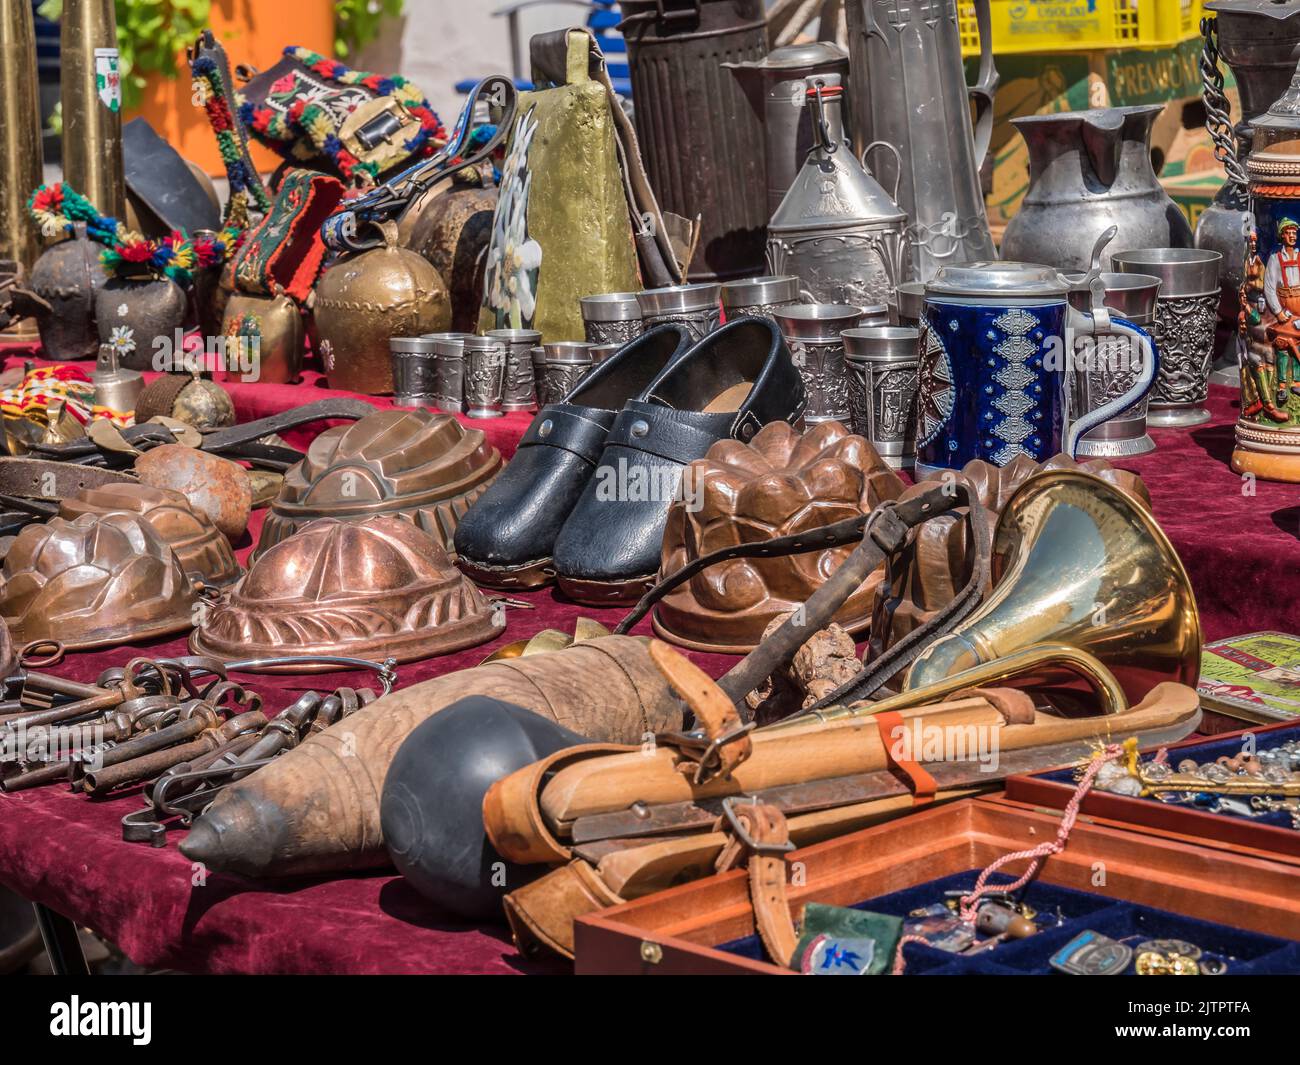 This street scene image is of the flea market antique fair held every Saturday in the old medieval city of Innsbruck, provincial capital city of Tirol Stock Photo